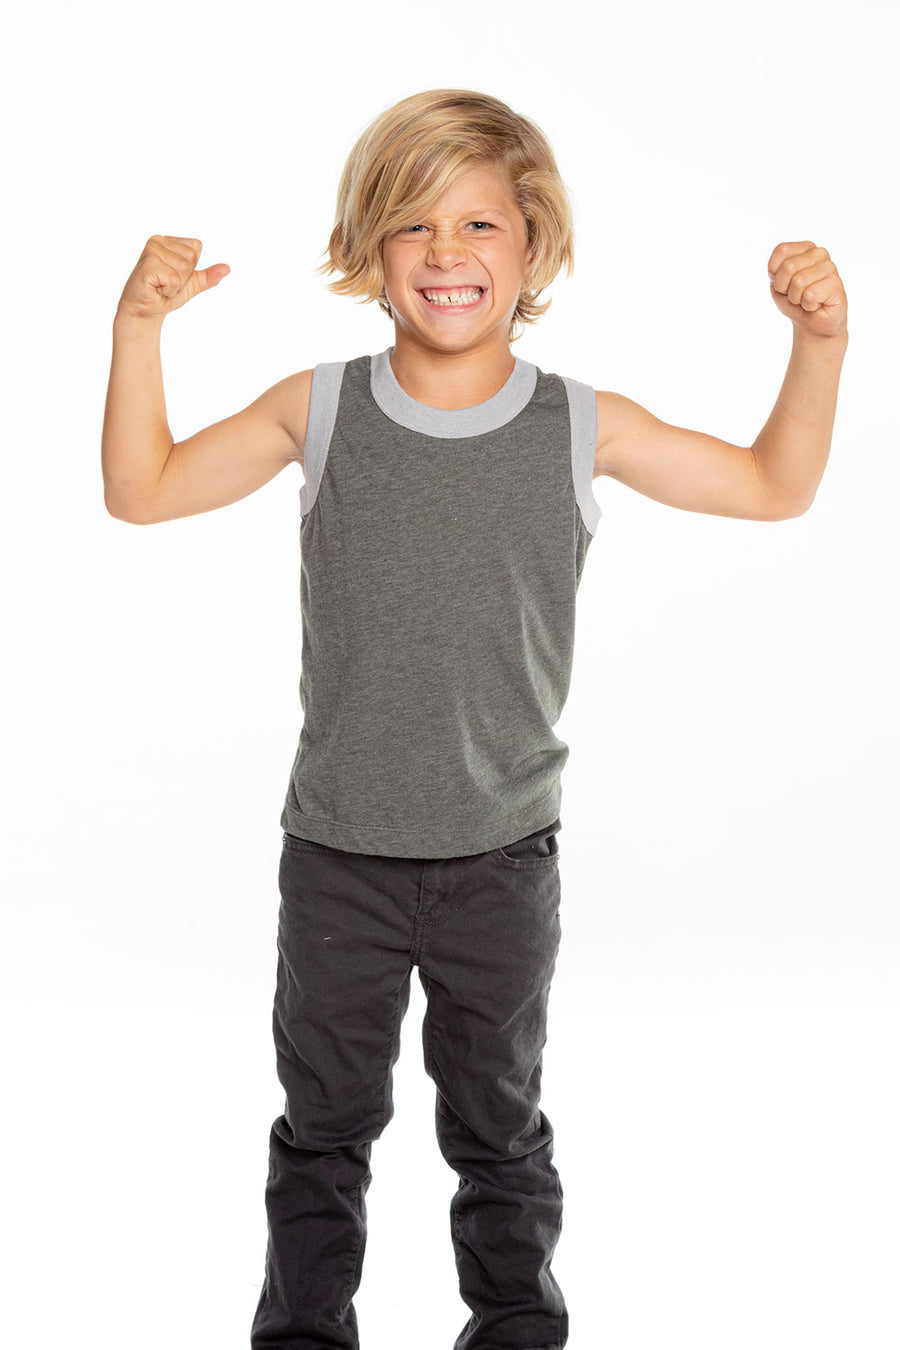 Boys Recycled Vintage Jersey Contrast Binding Muscle Tank BOYS - chaserbrand